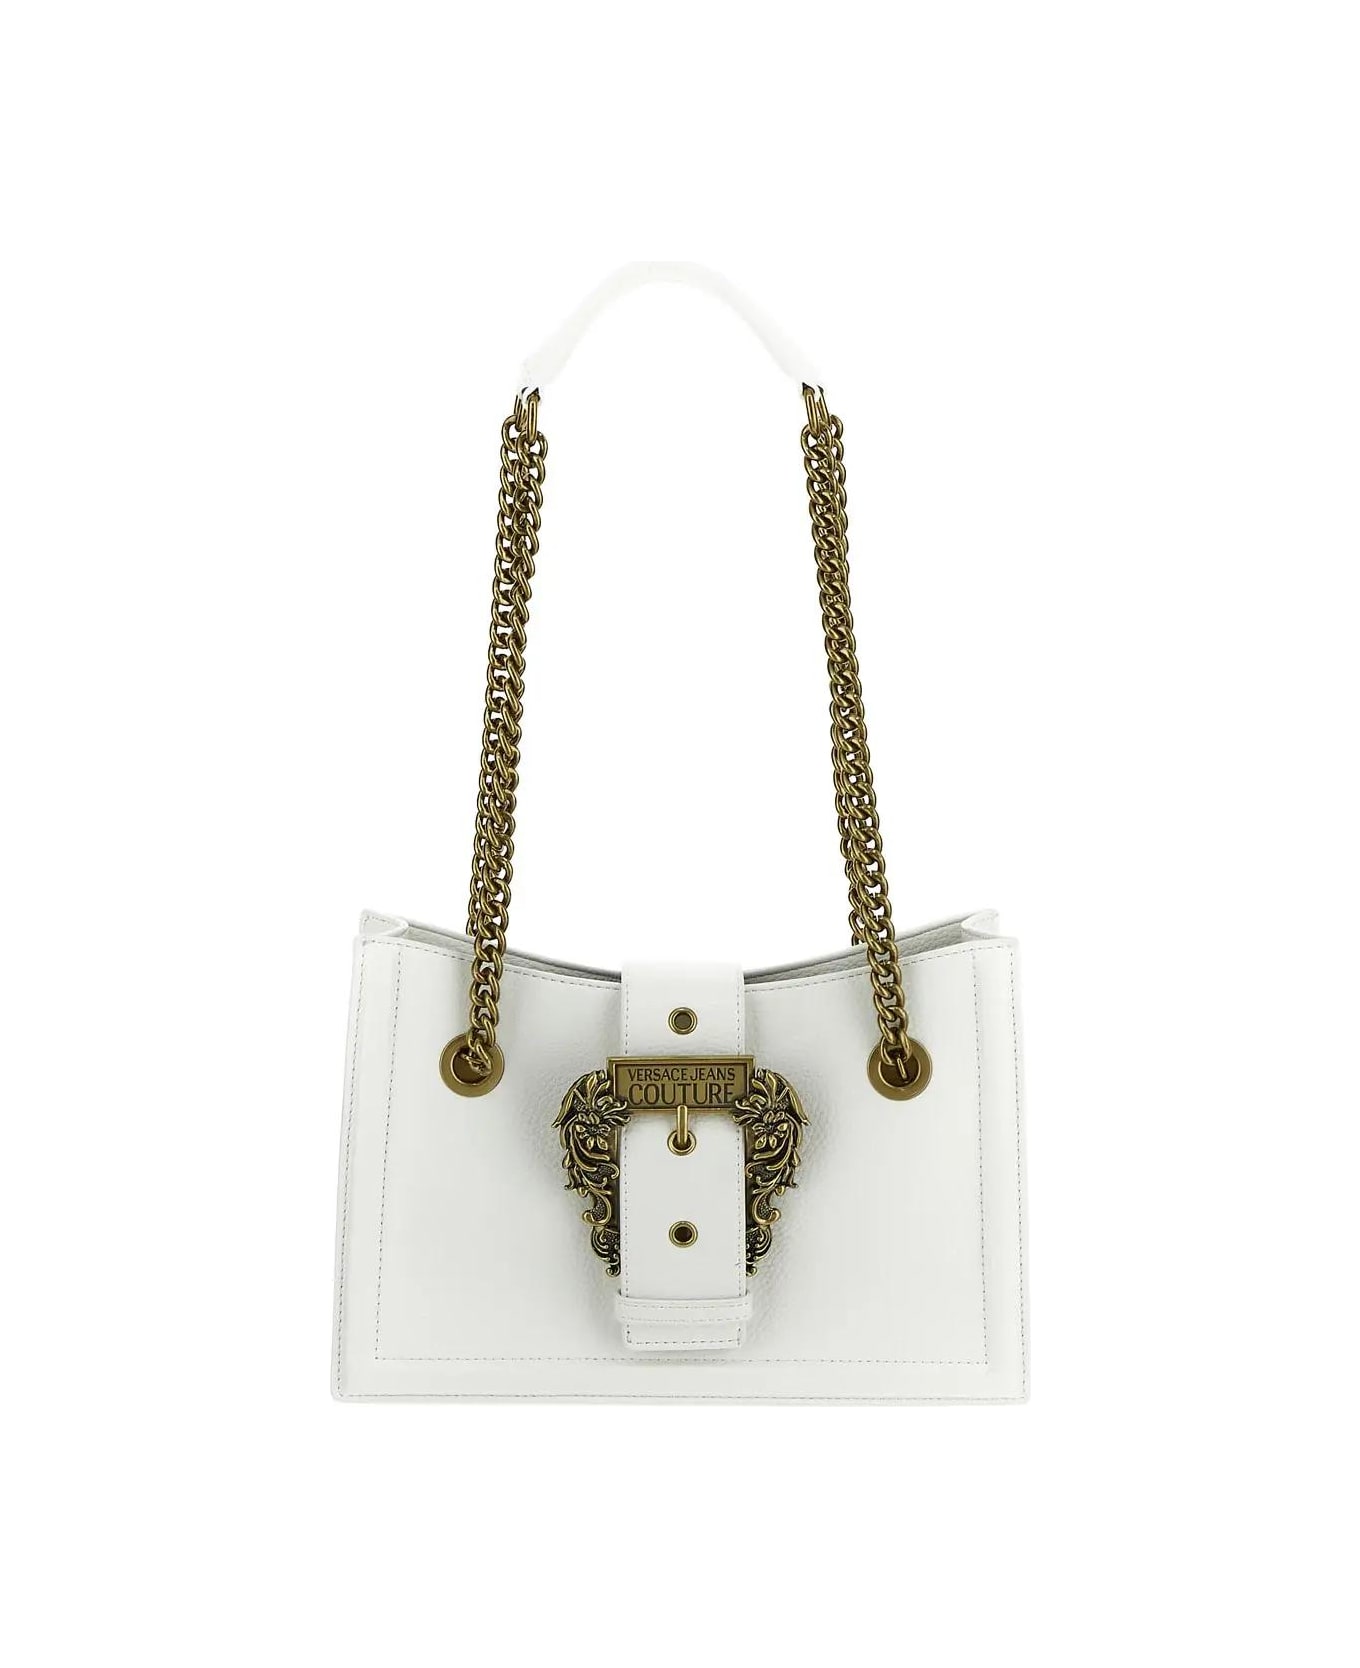 Versace Jeans Couture Embossed Buckle Shoulder Bag - White